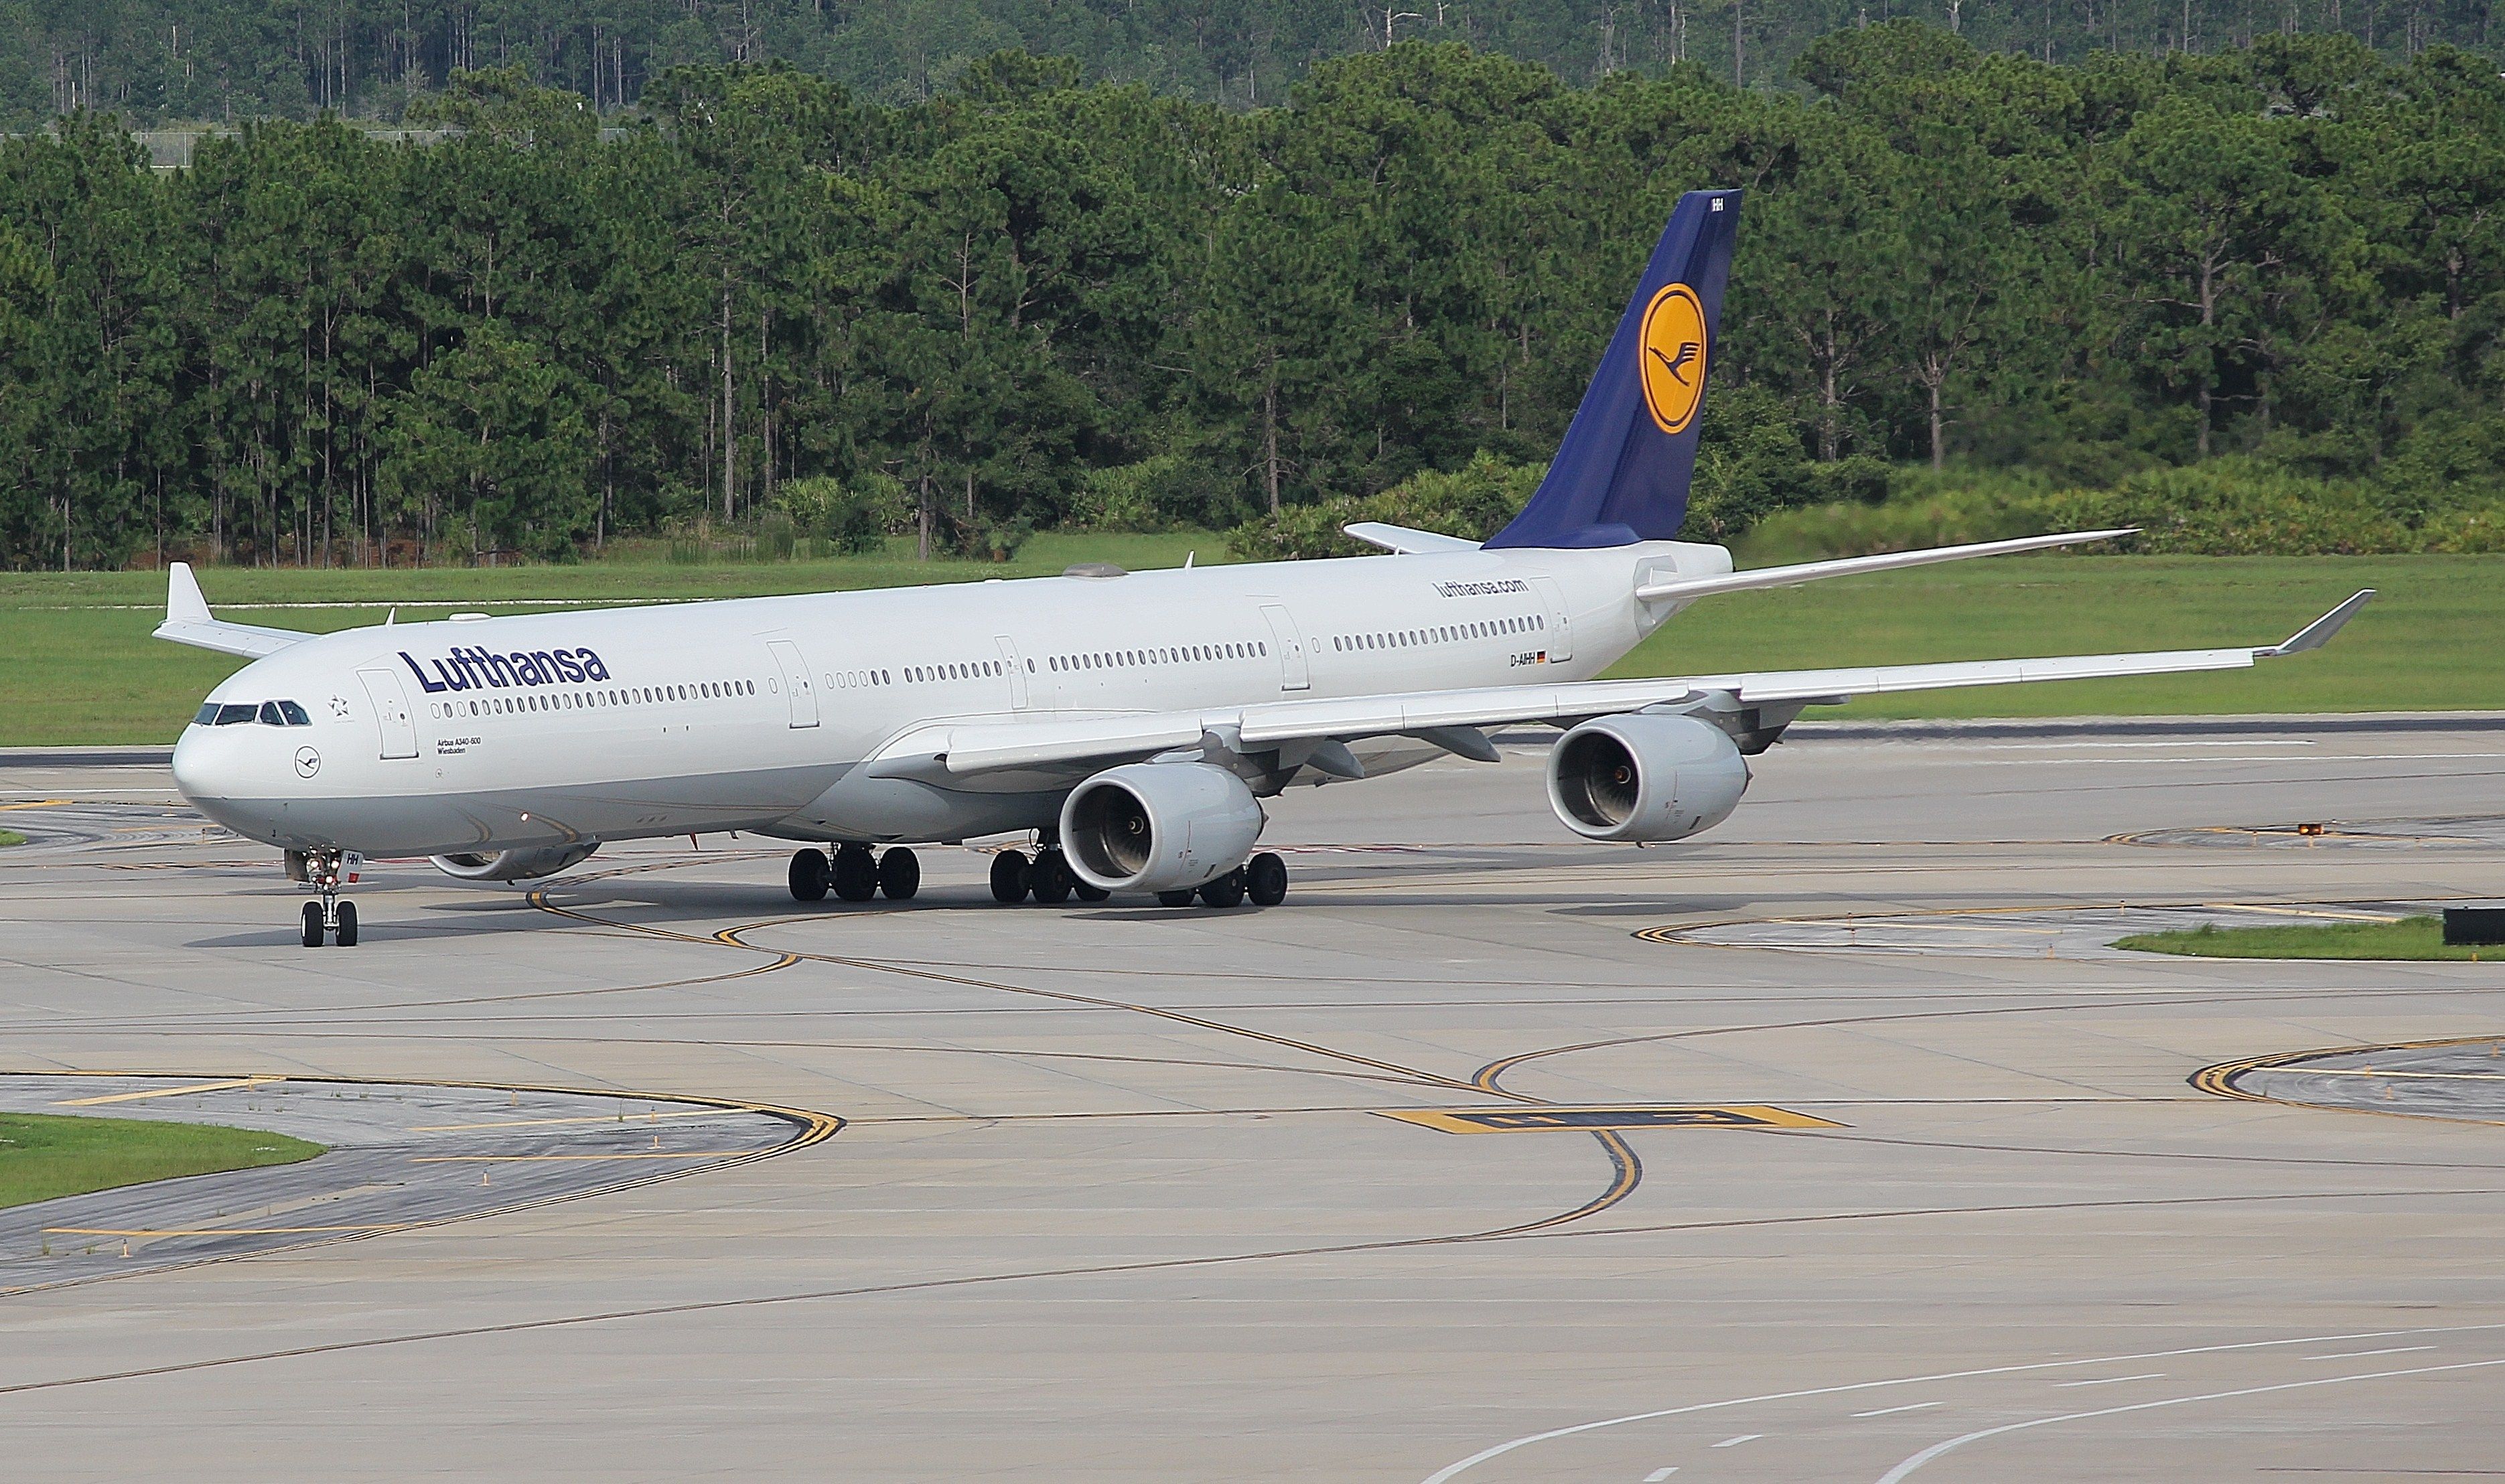 A Lufthansa Airbus A340 on the runway